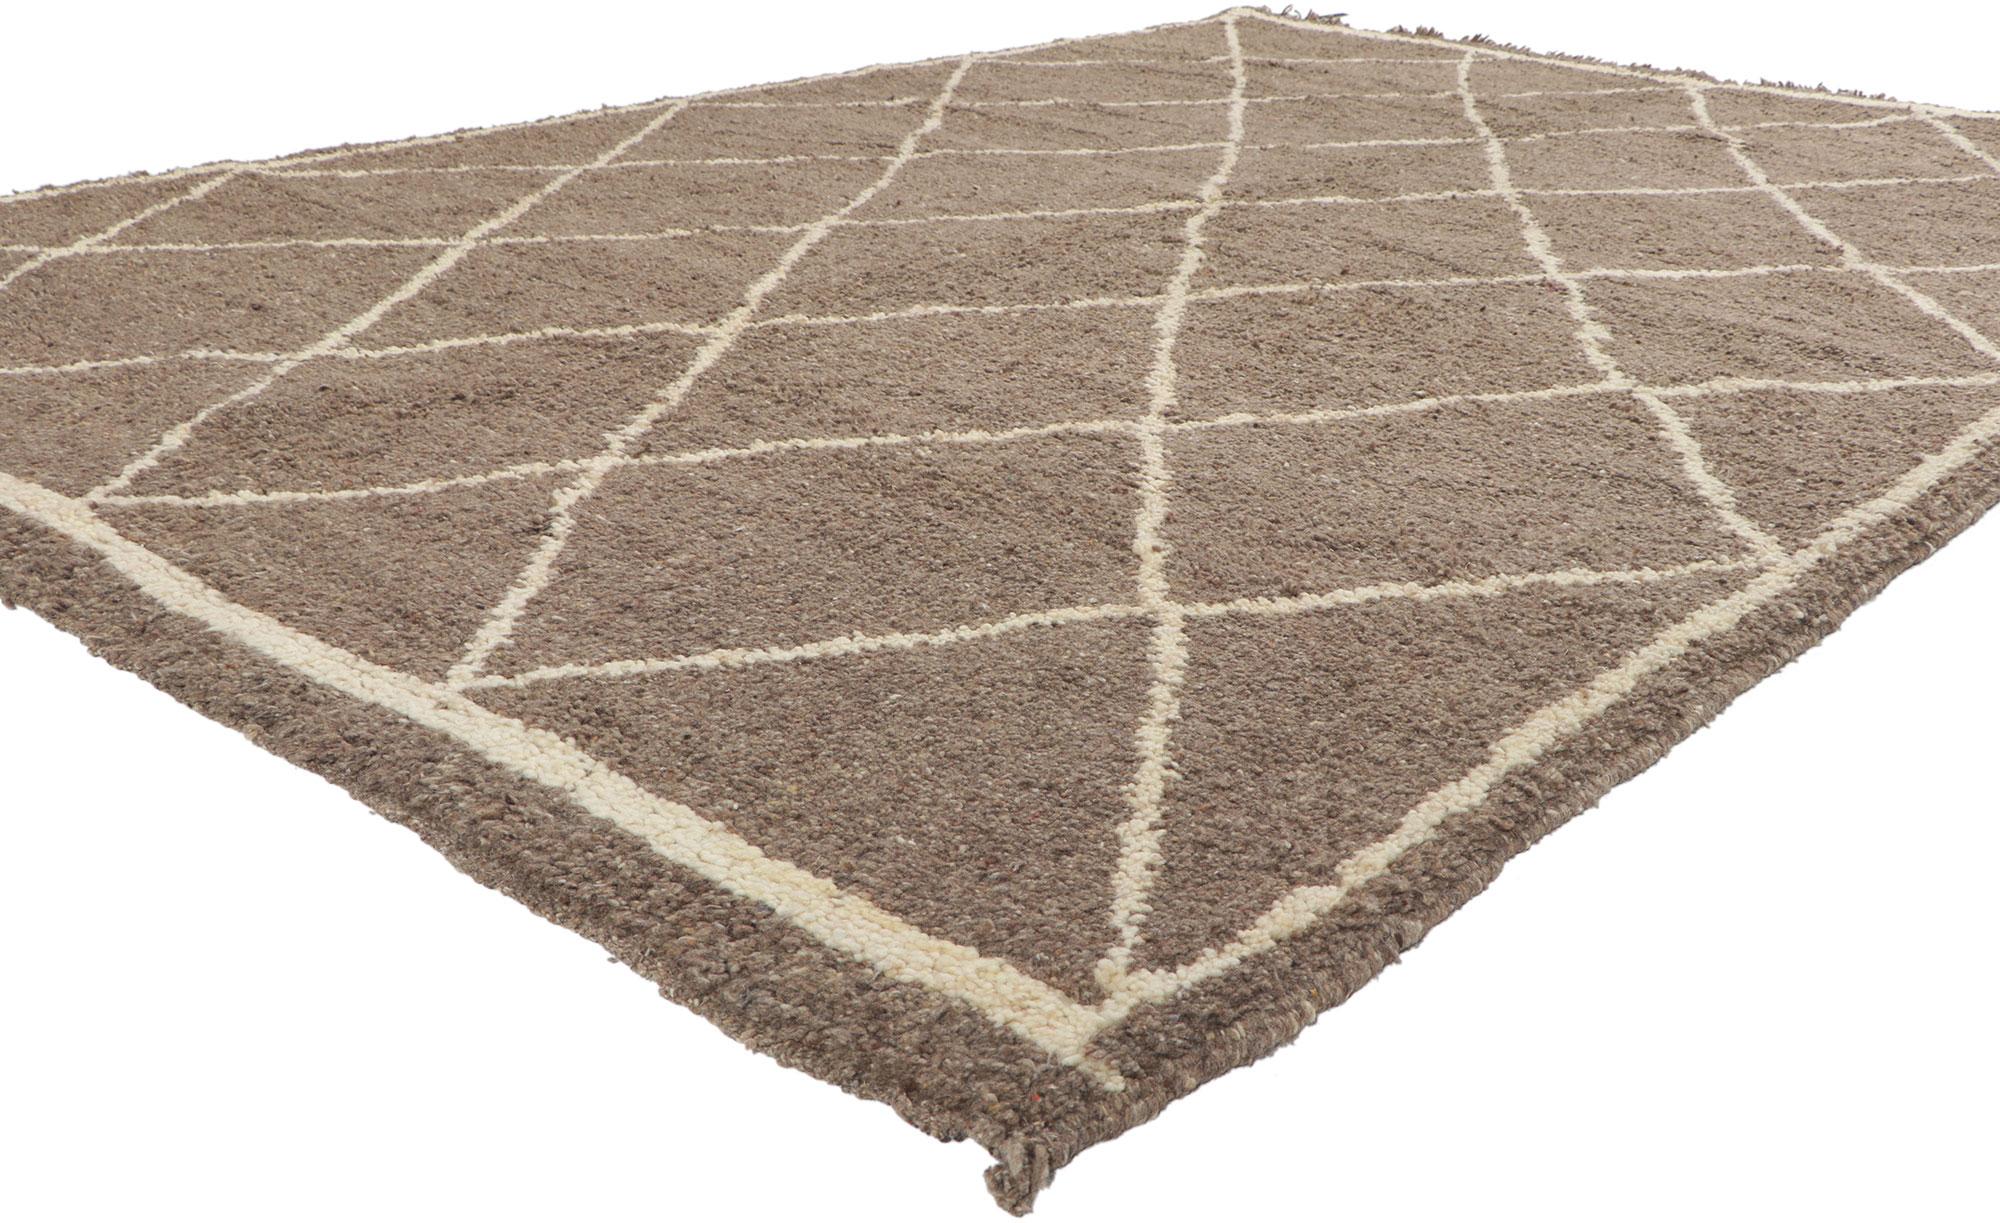 78368 Vintage Moroccan Beni Ourain rug. ?With its simplicity, plush pile, incredible detail and texture, this hand knotted wool vintage Beni Ourain Moroccan rug is a captivating vision of woven beauty. The eye-catching diamond trellis and earthy